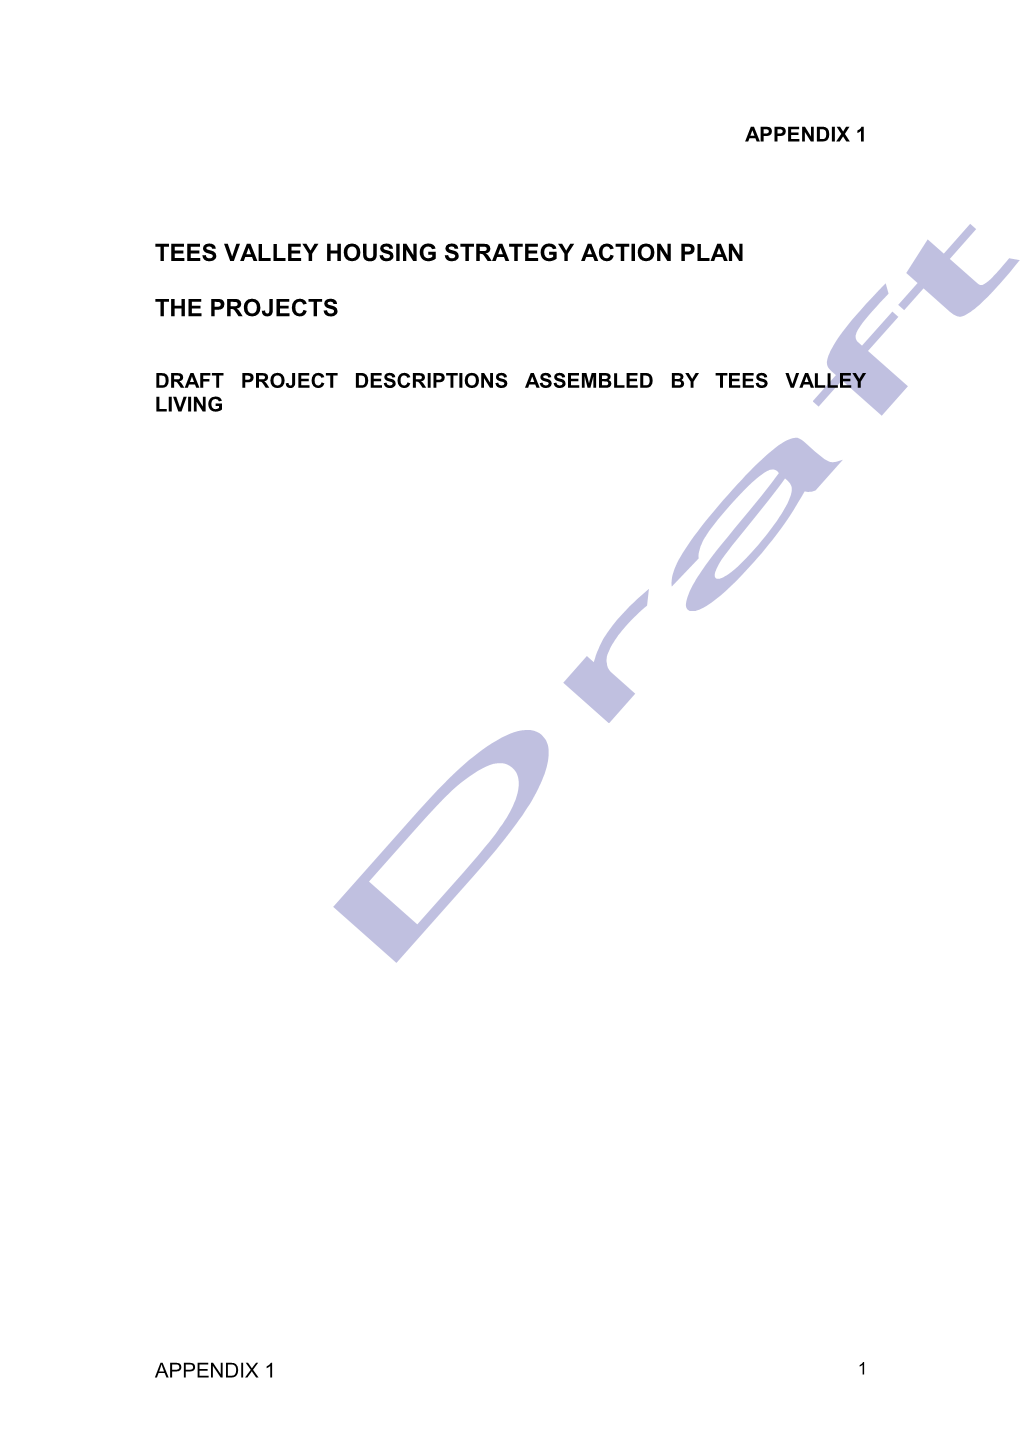 Tees Valley Housing Strategy Action Plan